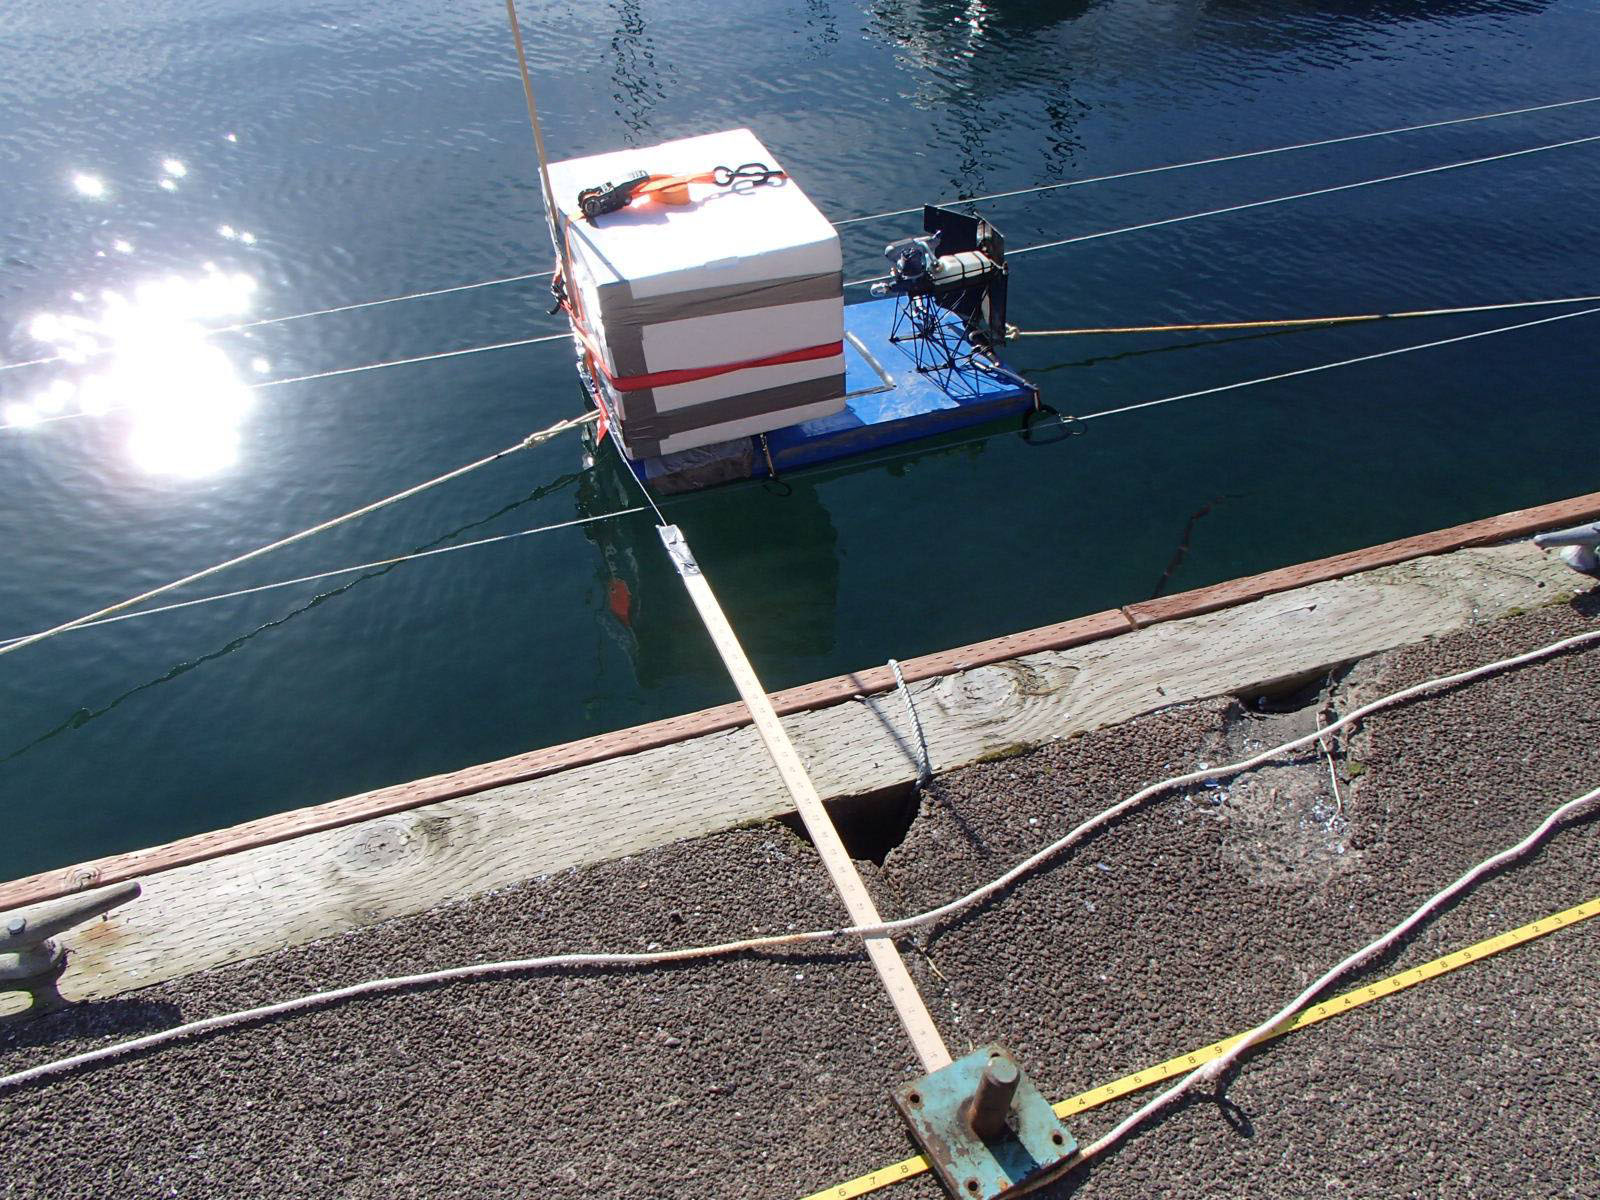 A foam box is rigged with a pulley system, allowing a drone to capture images of it from various distances.